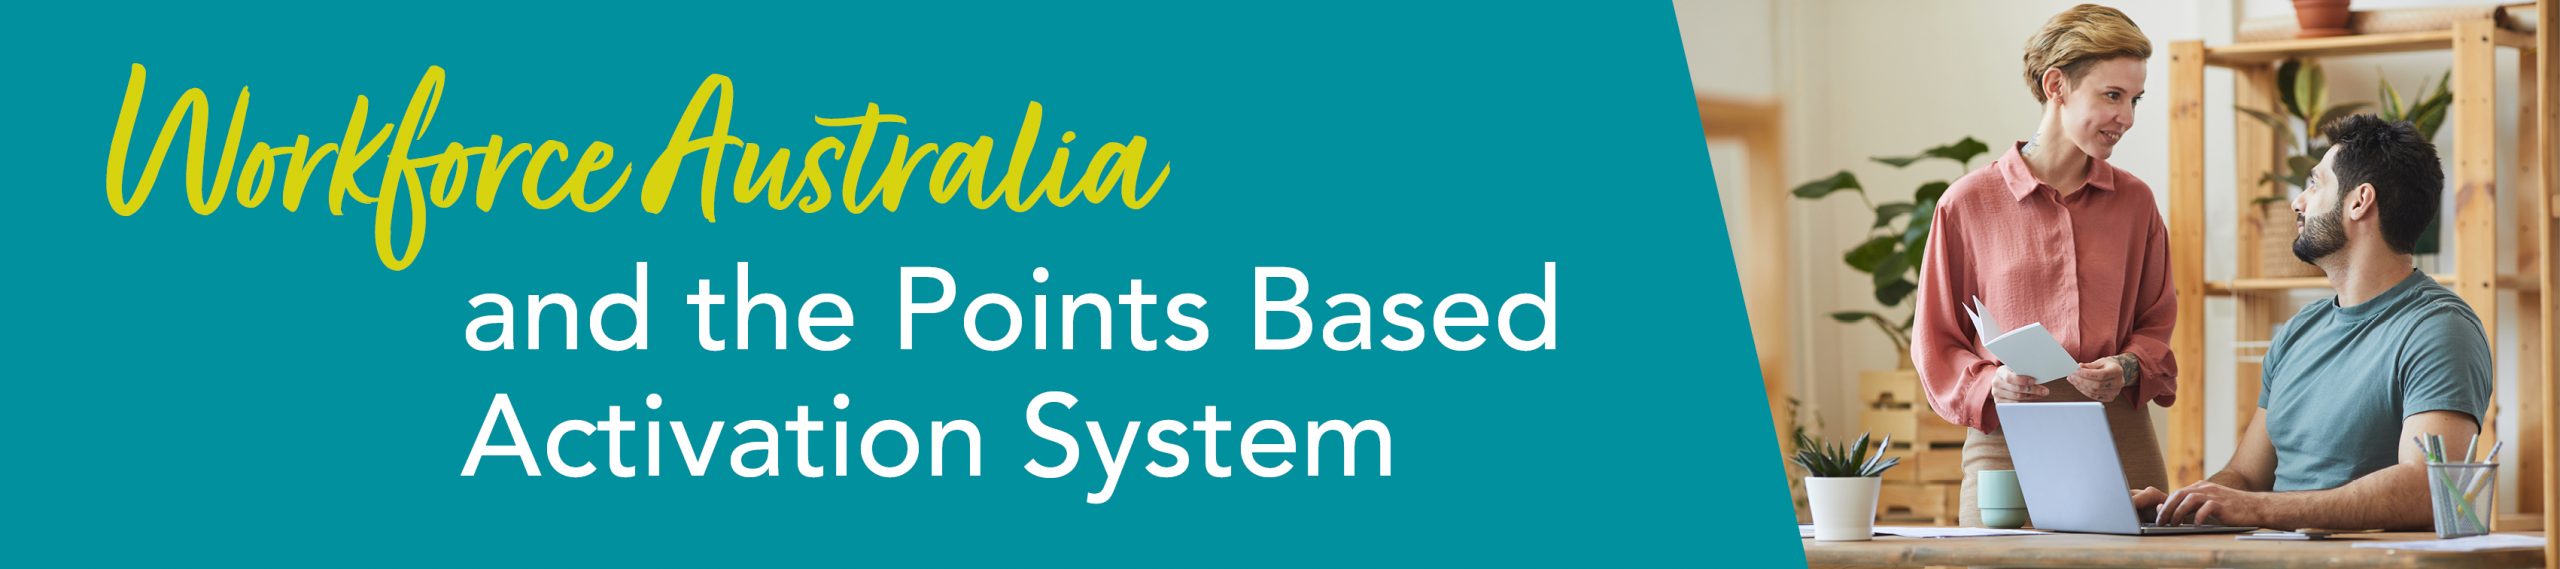 Workforce Australia and the points based activation system